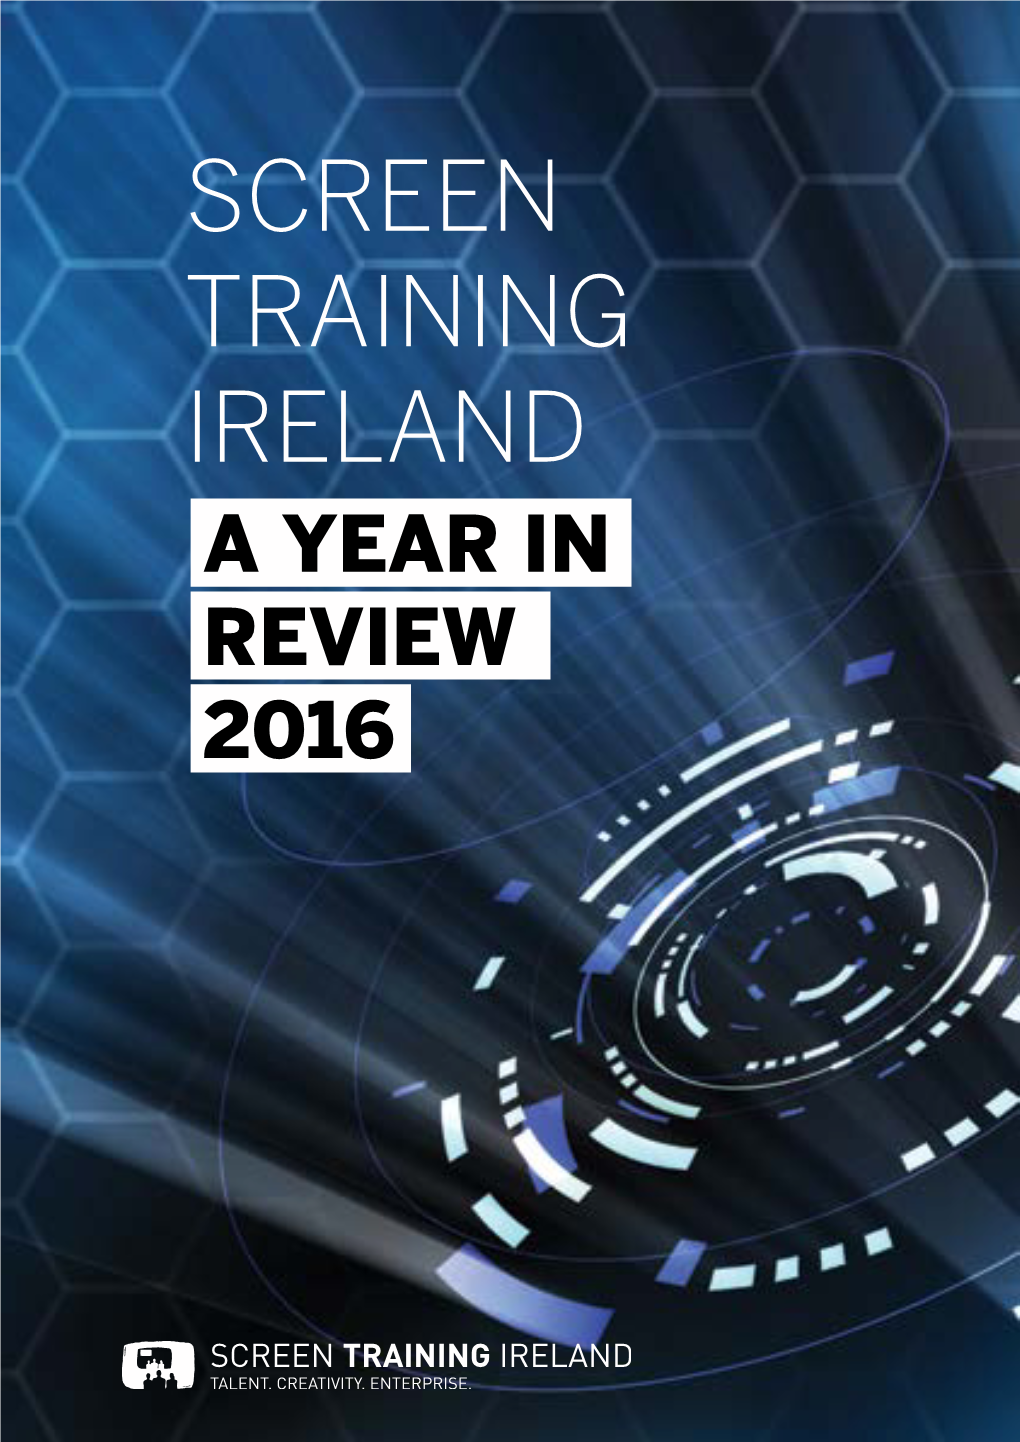 A Year in Review 2016 Screen Training Ireland a Year in Review 2016